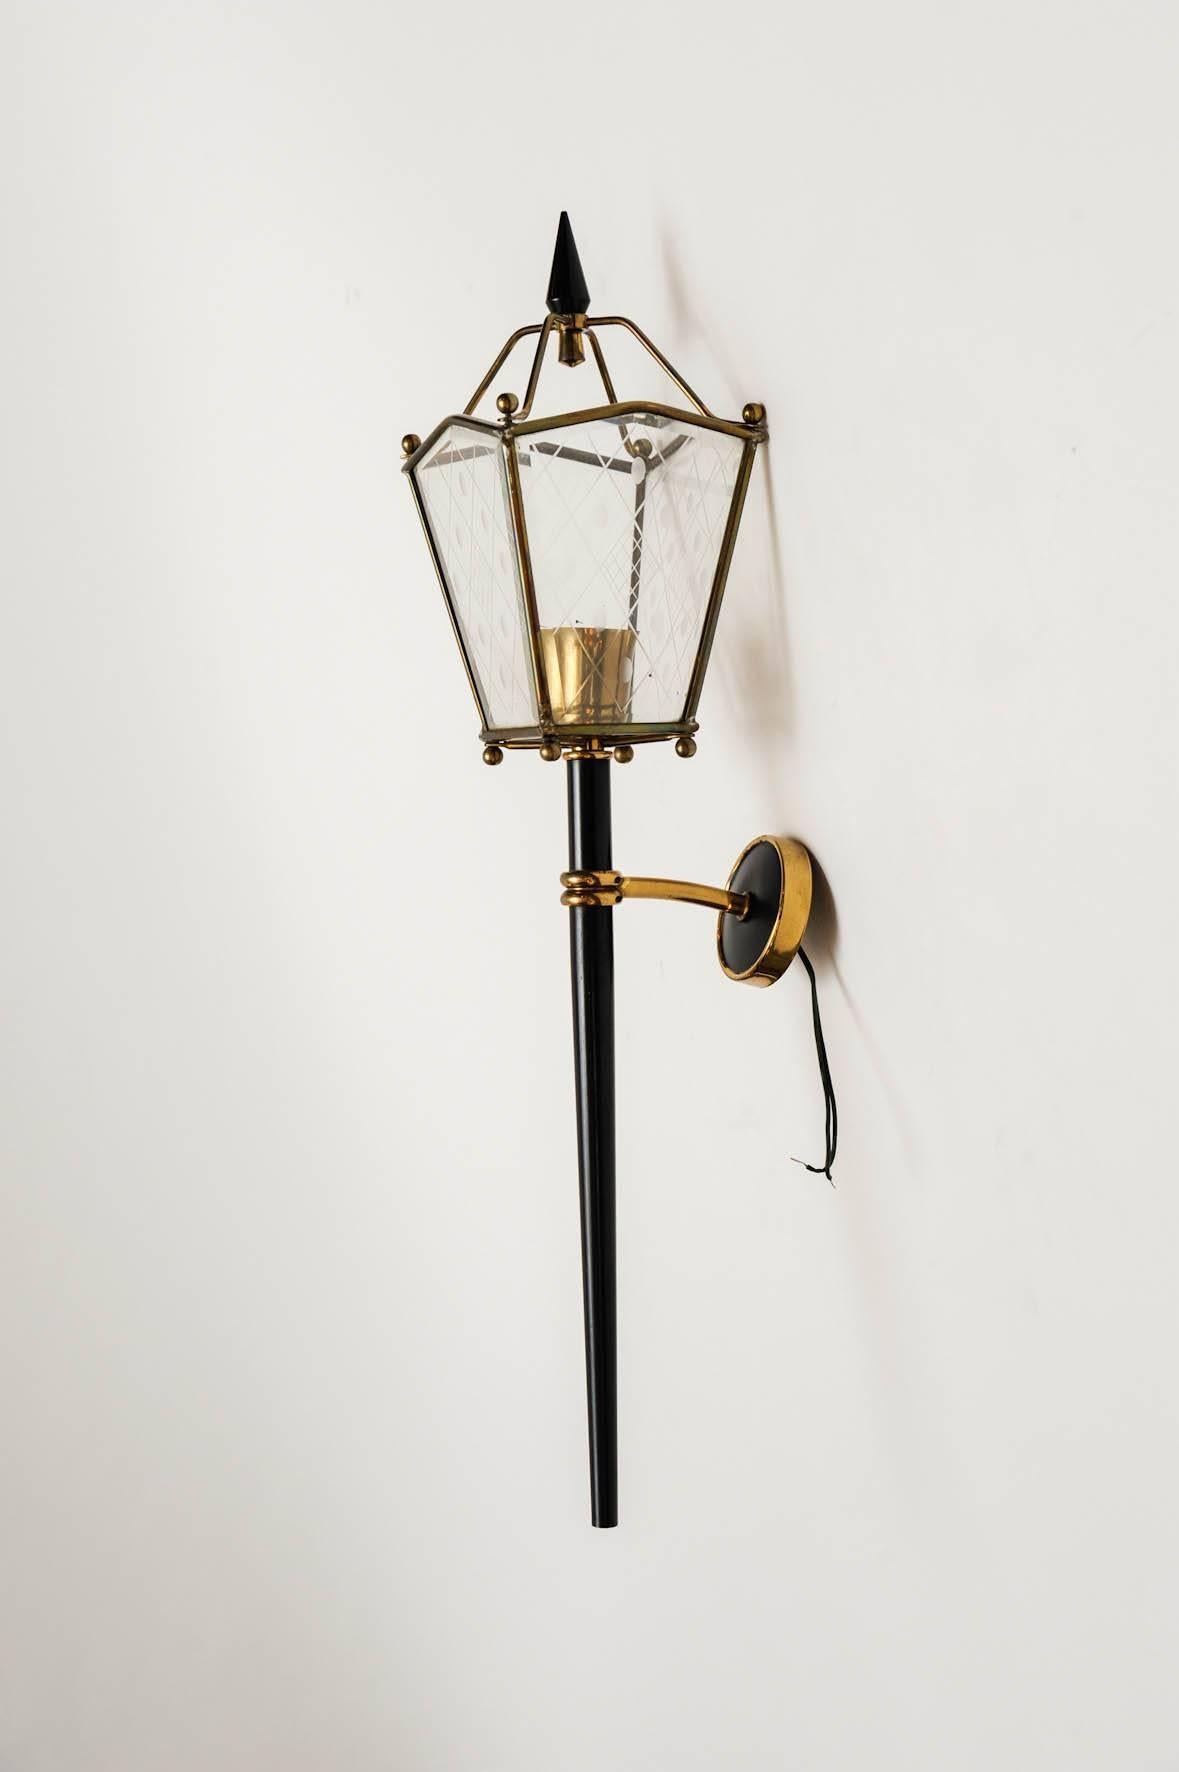 Pair of nice lantern shaped wall sconces made of black painted metal, brass details and glass panels with engraved decors.